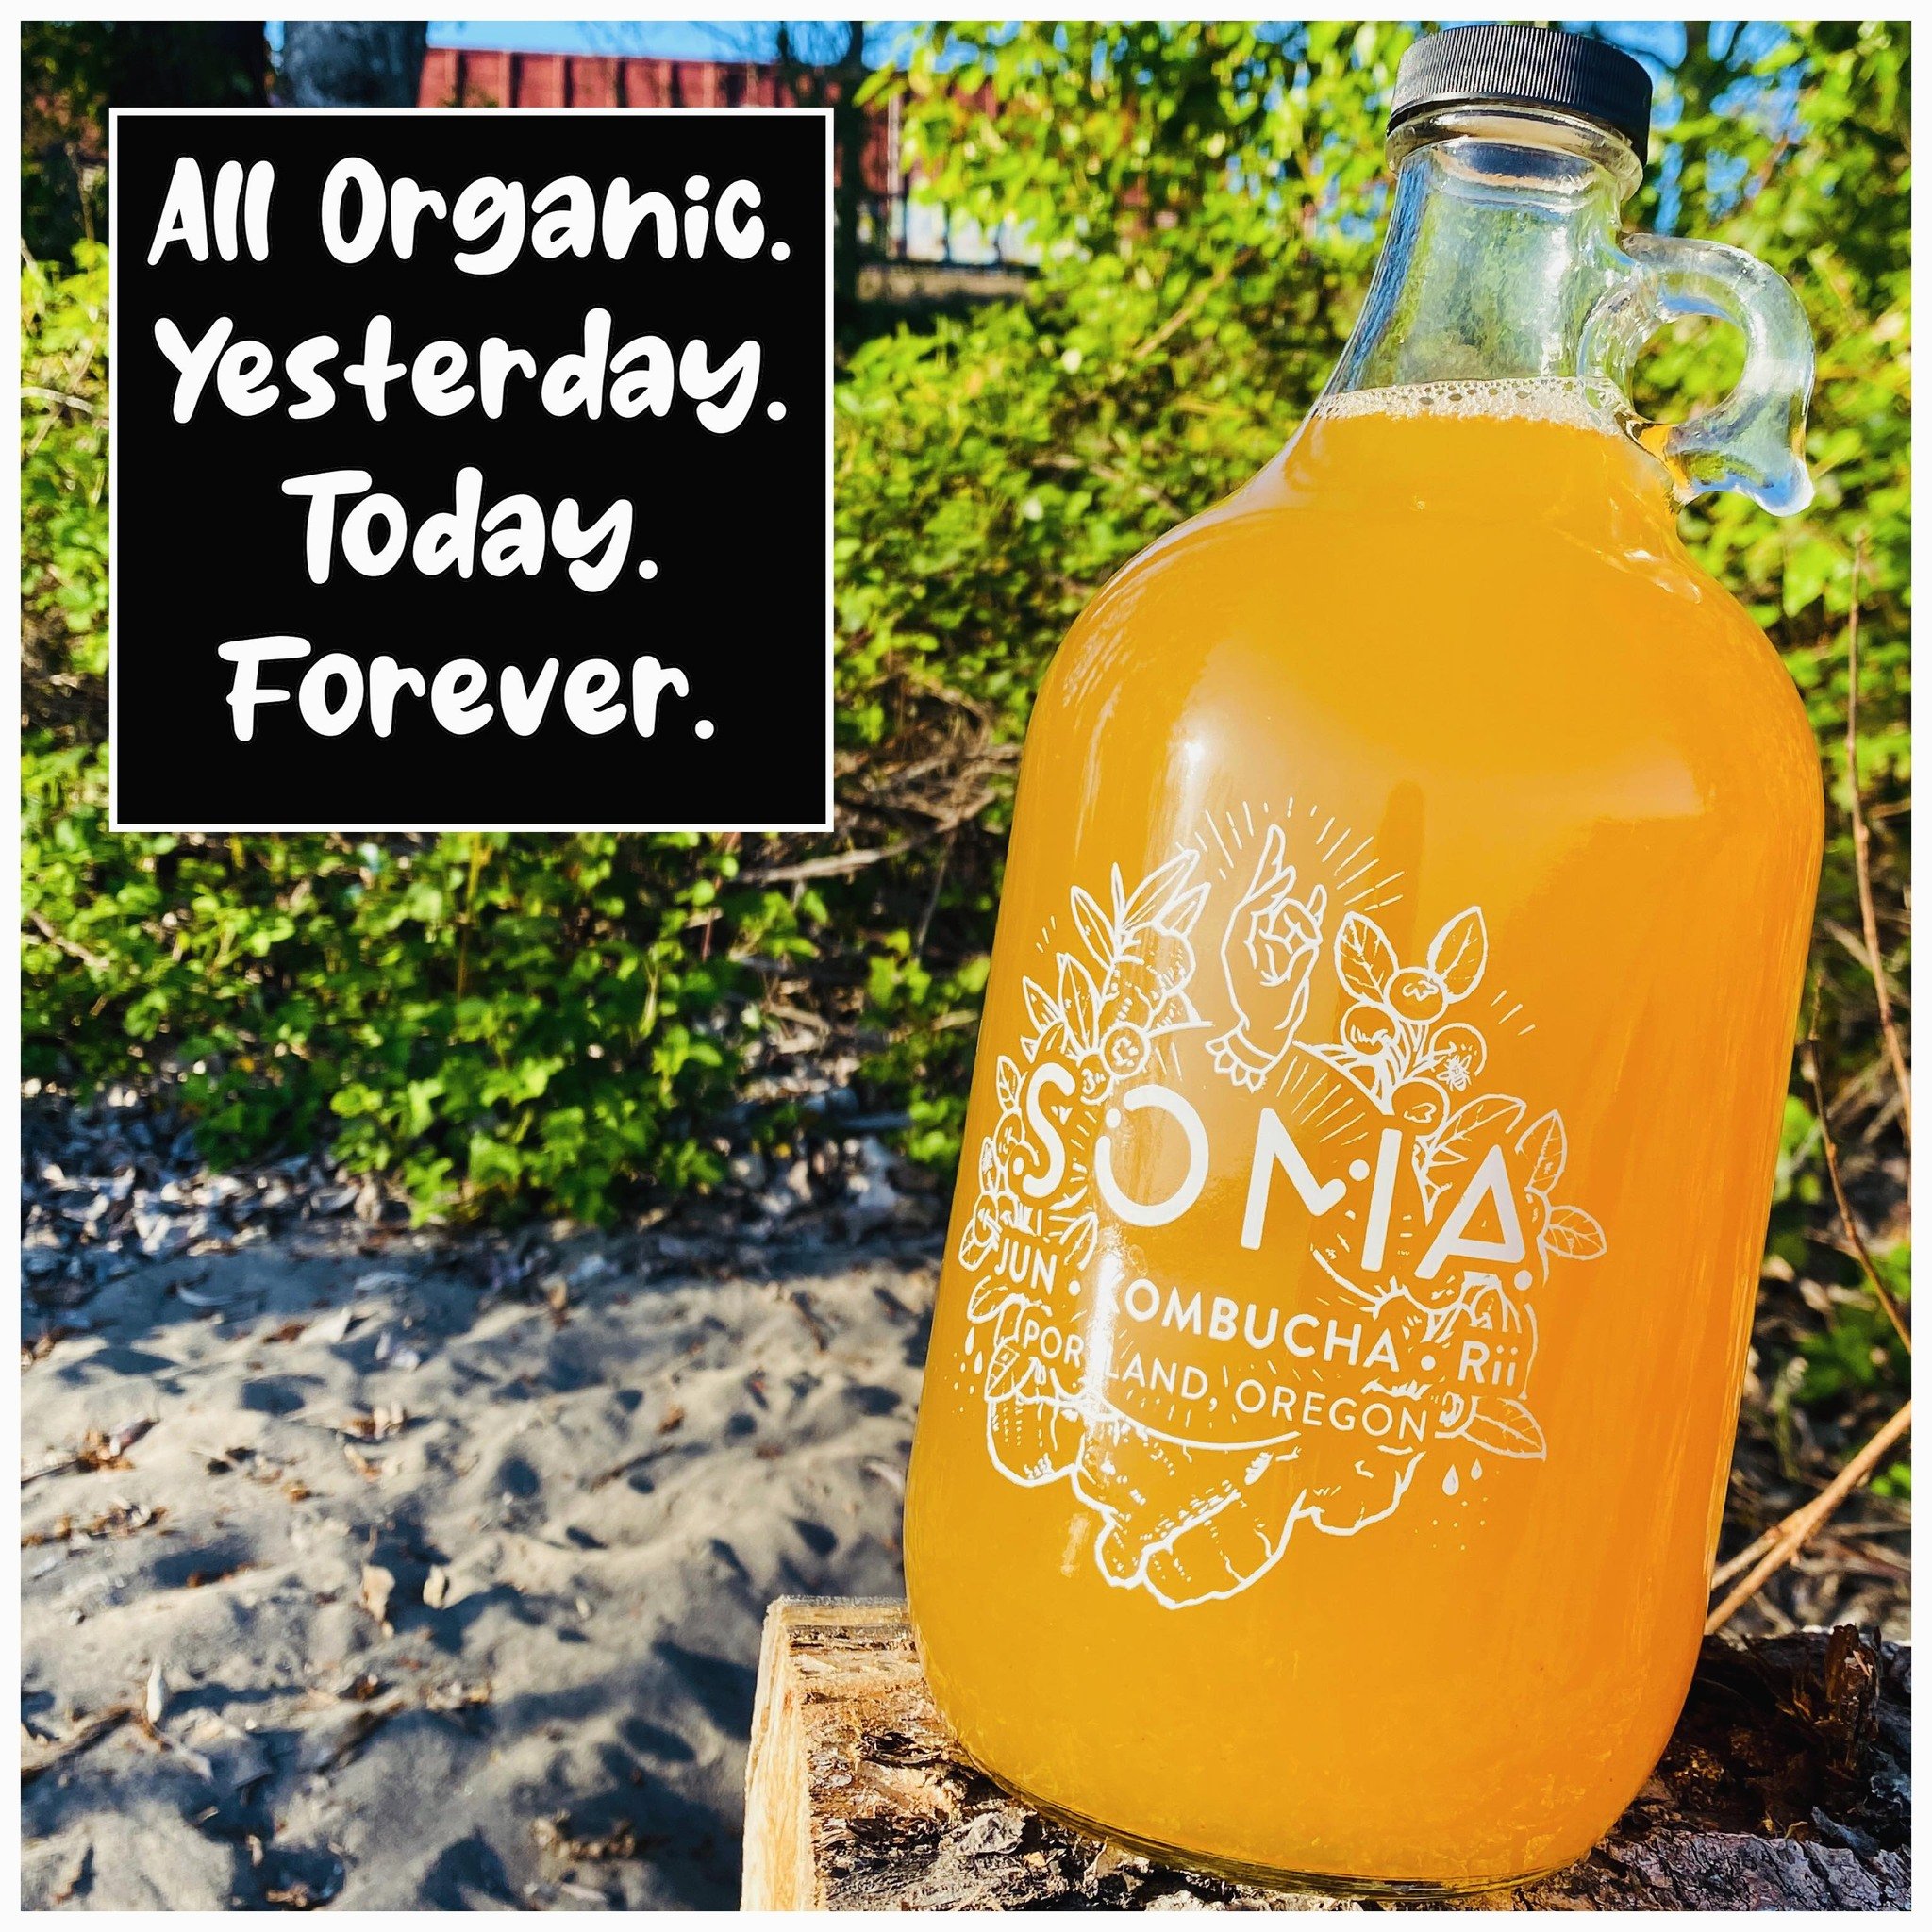 Soma Kombucha: Where Organic is a Way of Life 

At Soma Kombucha, we&rsquo;ve been committed to organic practices from the very beginning, and that&rsquo;s a promise we intend to keep forever. From our carefully selected ingredients to our brewing pr